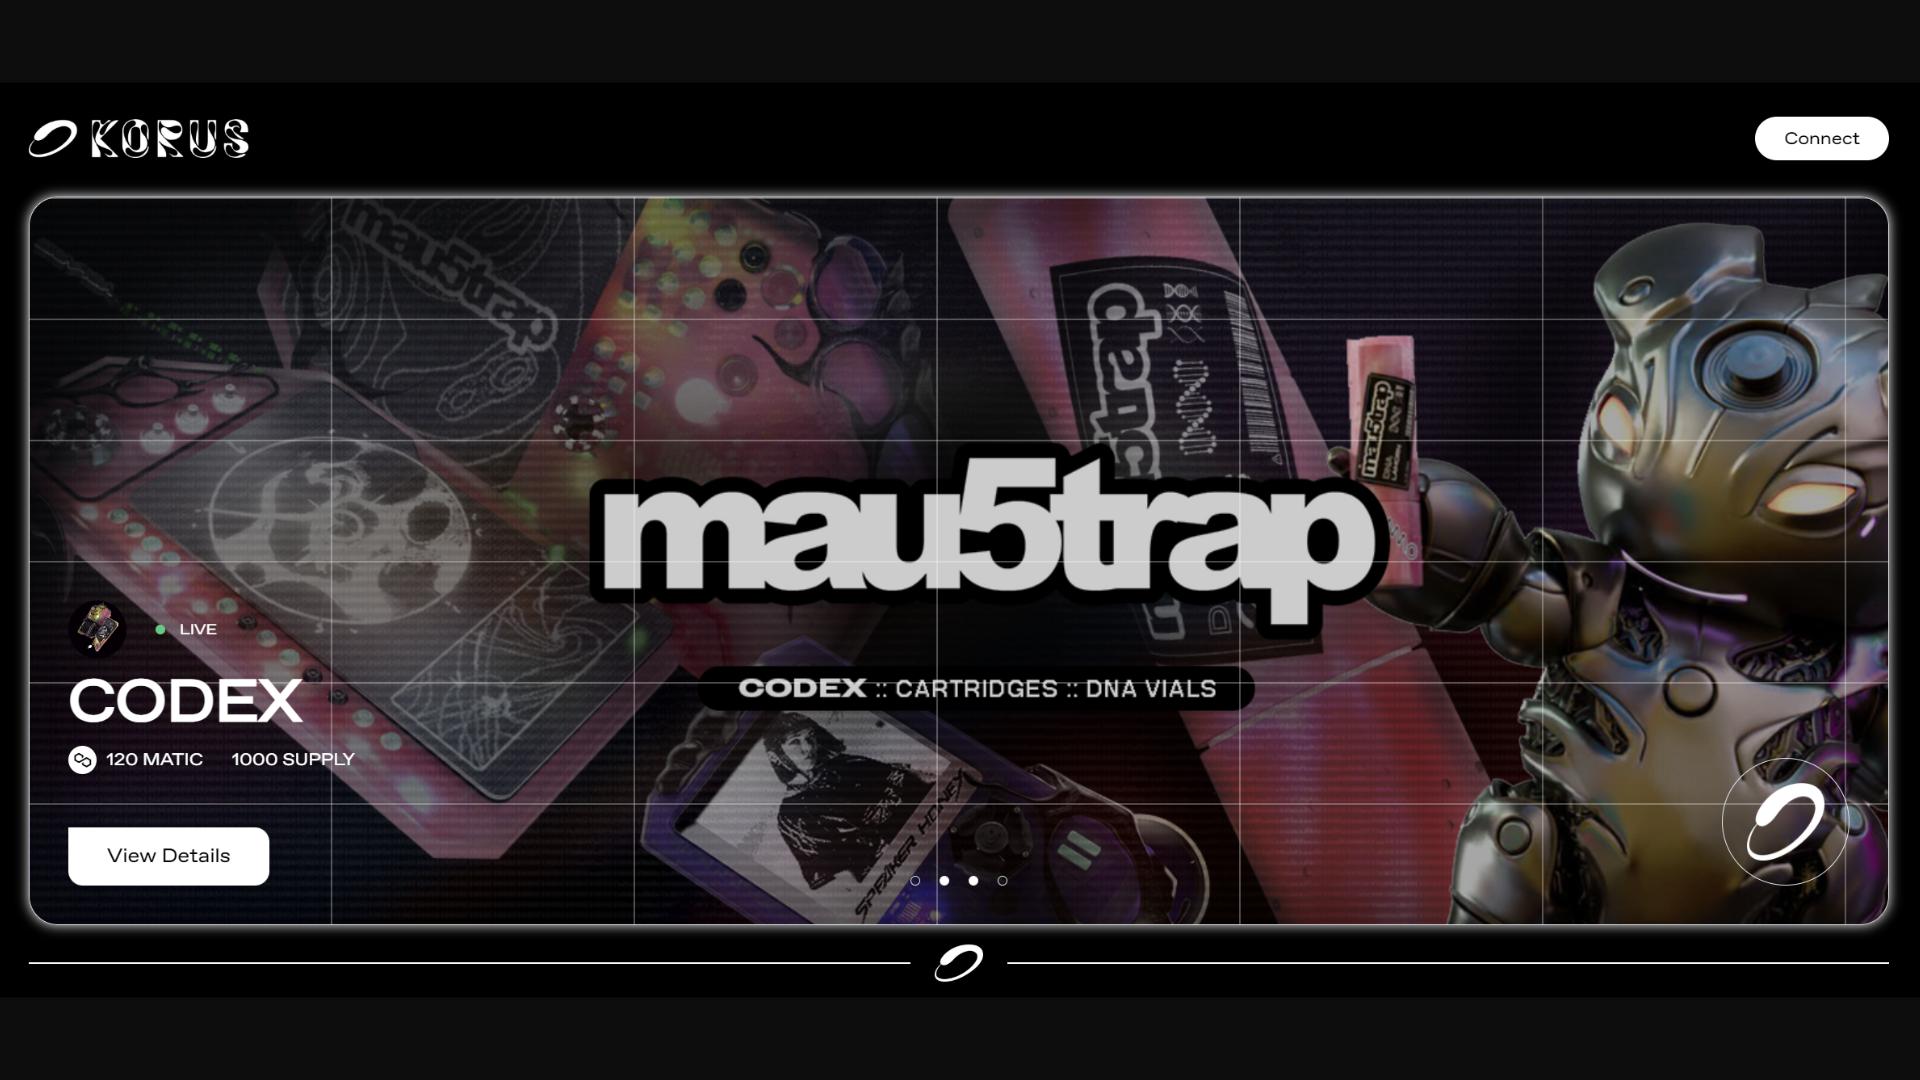 Pixelynx Is Revolutionizing Music Creation With The Latest mau5trapDNA Project!